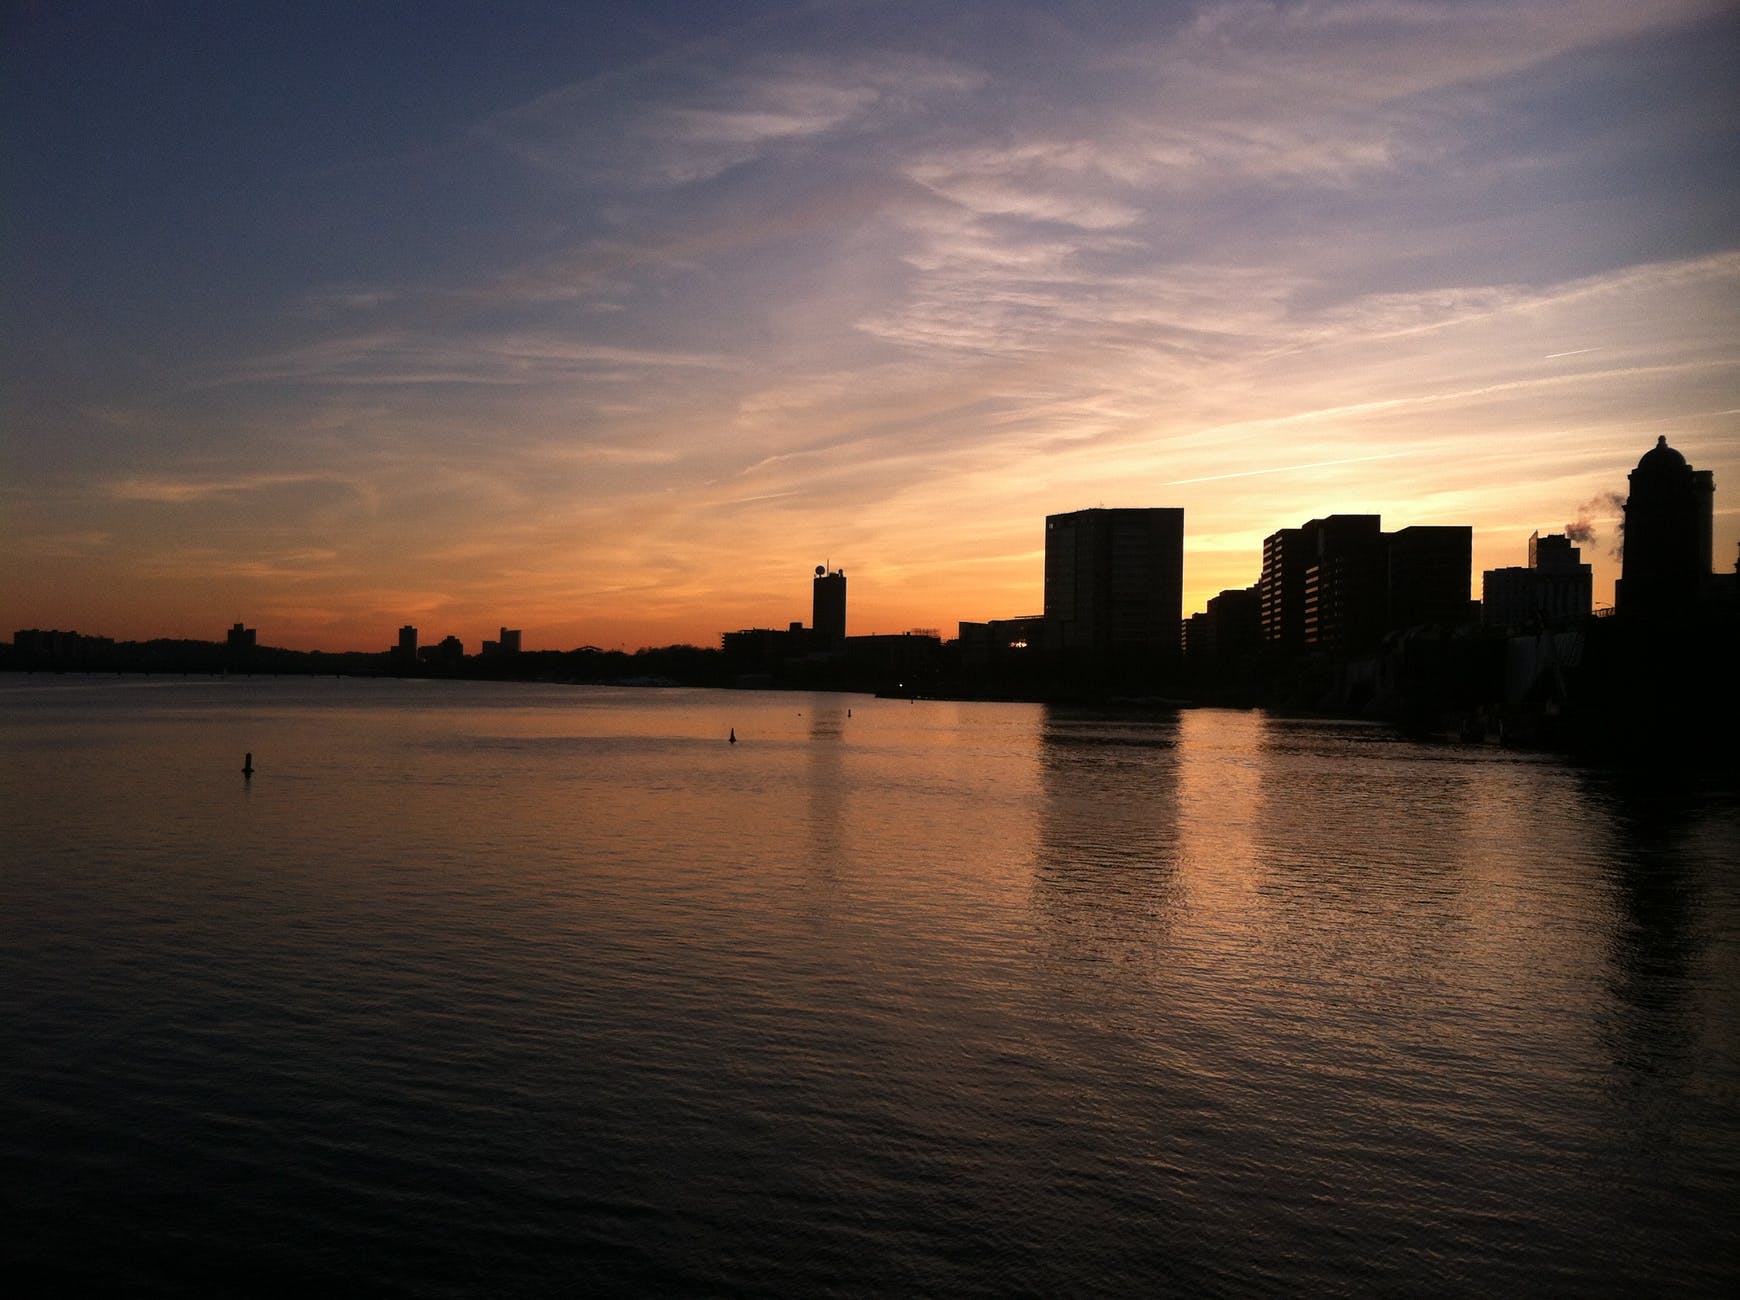 silhouette photograph of buildings near calm body of water